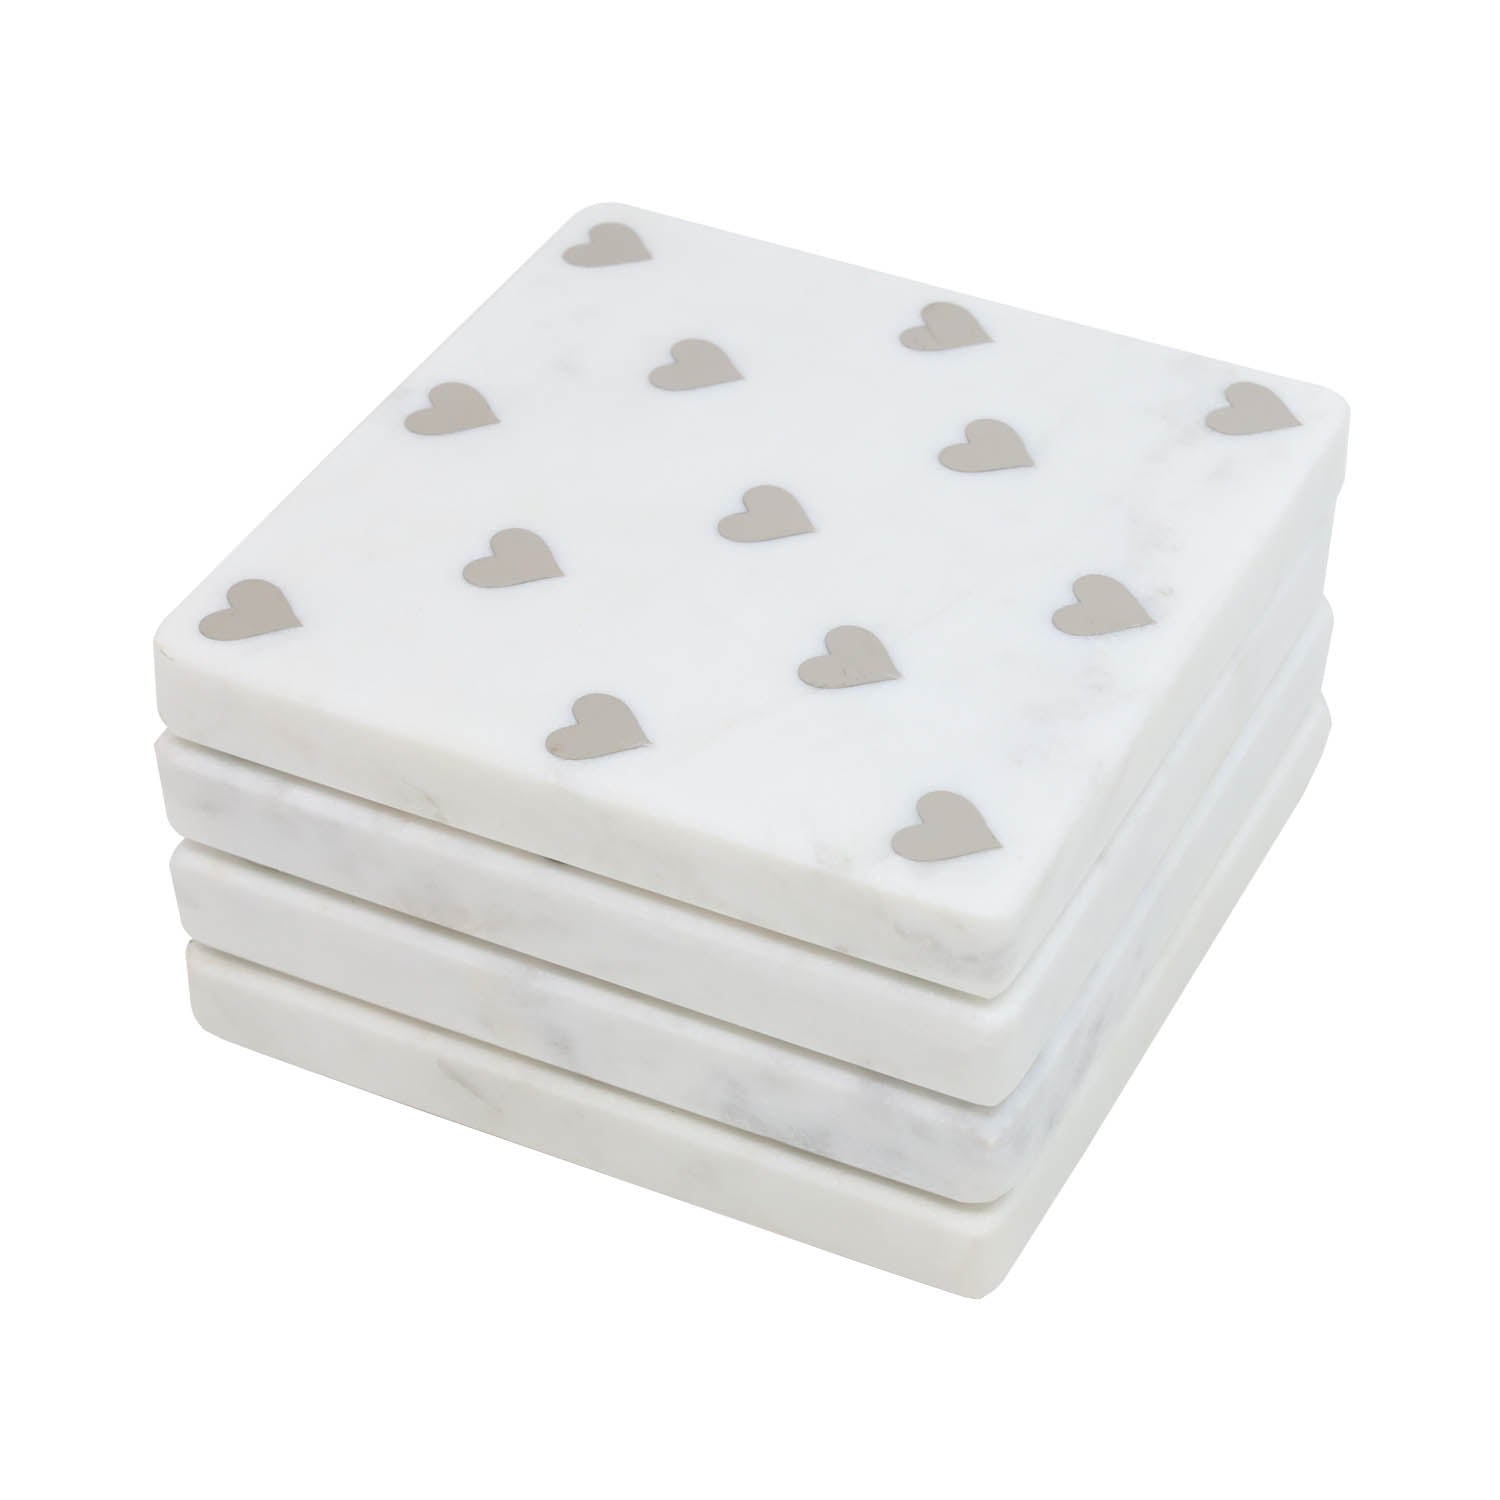 Set Of 4 White Marble Heart Coasters